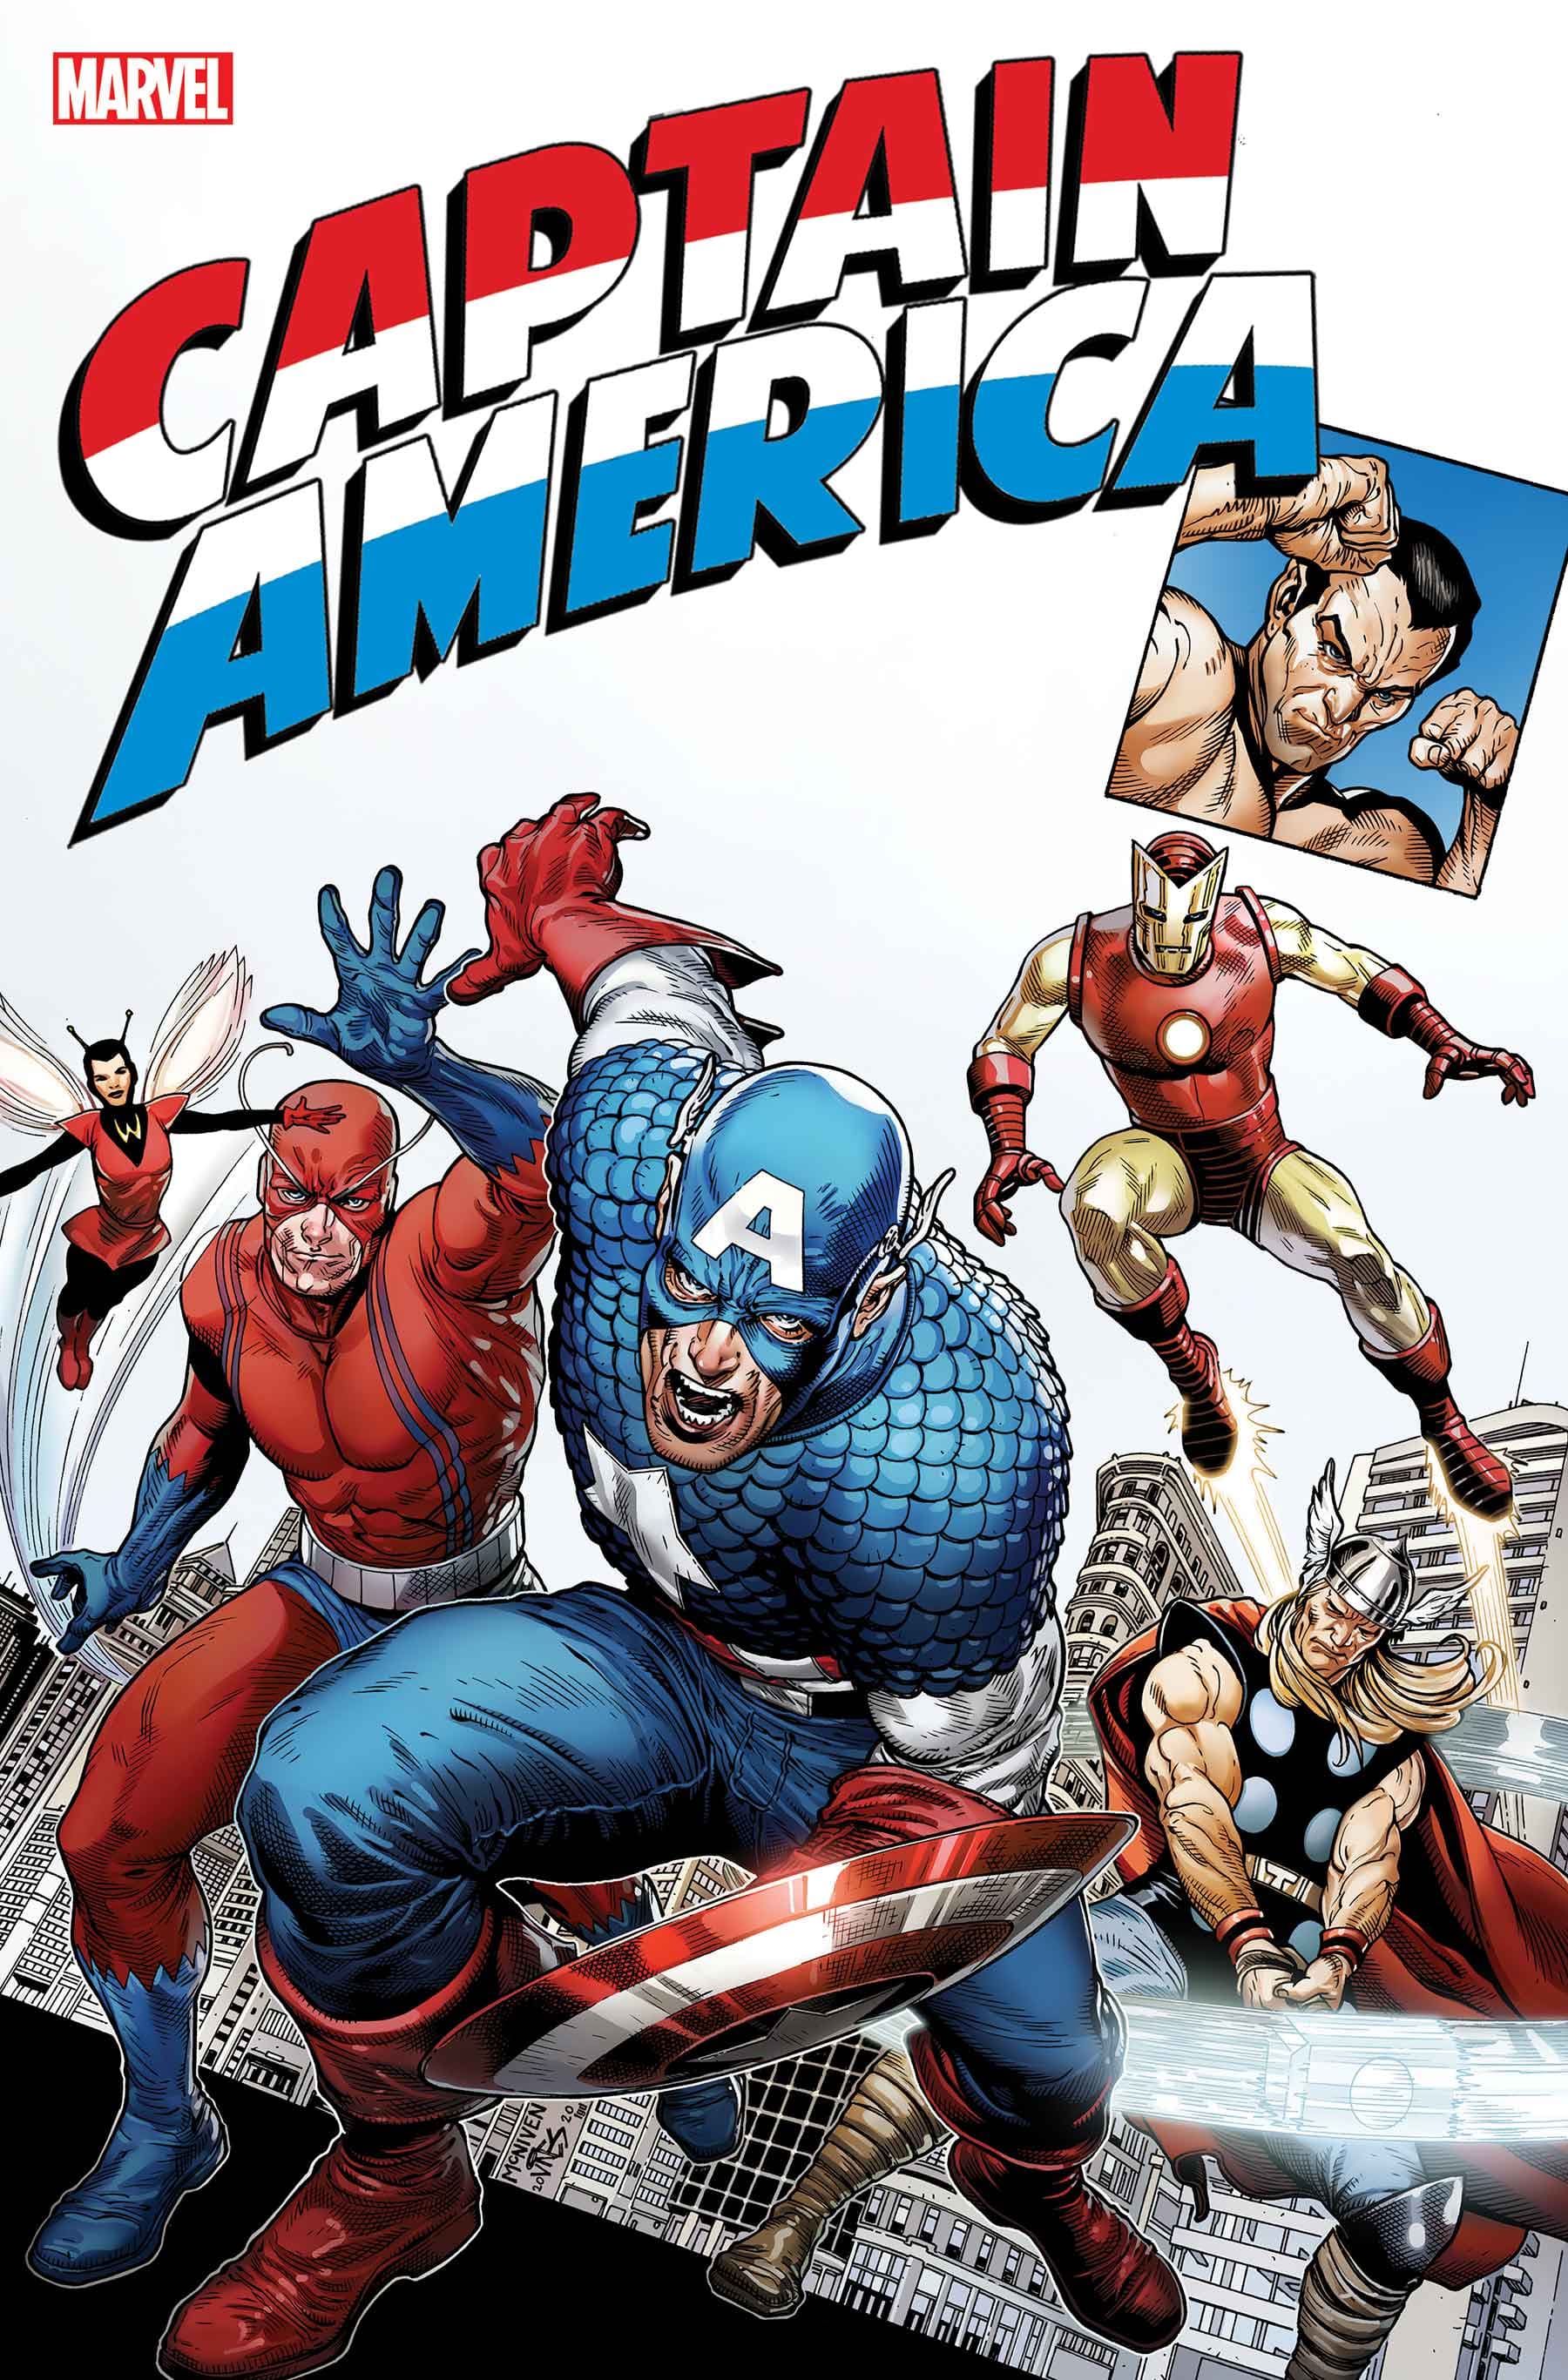 Marvel Celebrates 80 Years of Captain America with a Giant-Sized